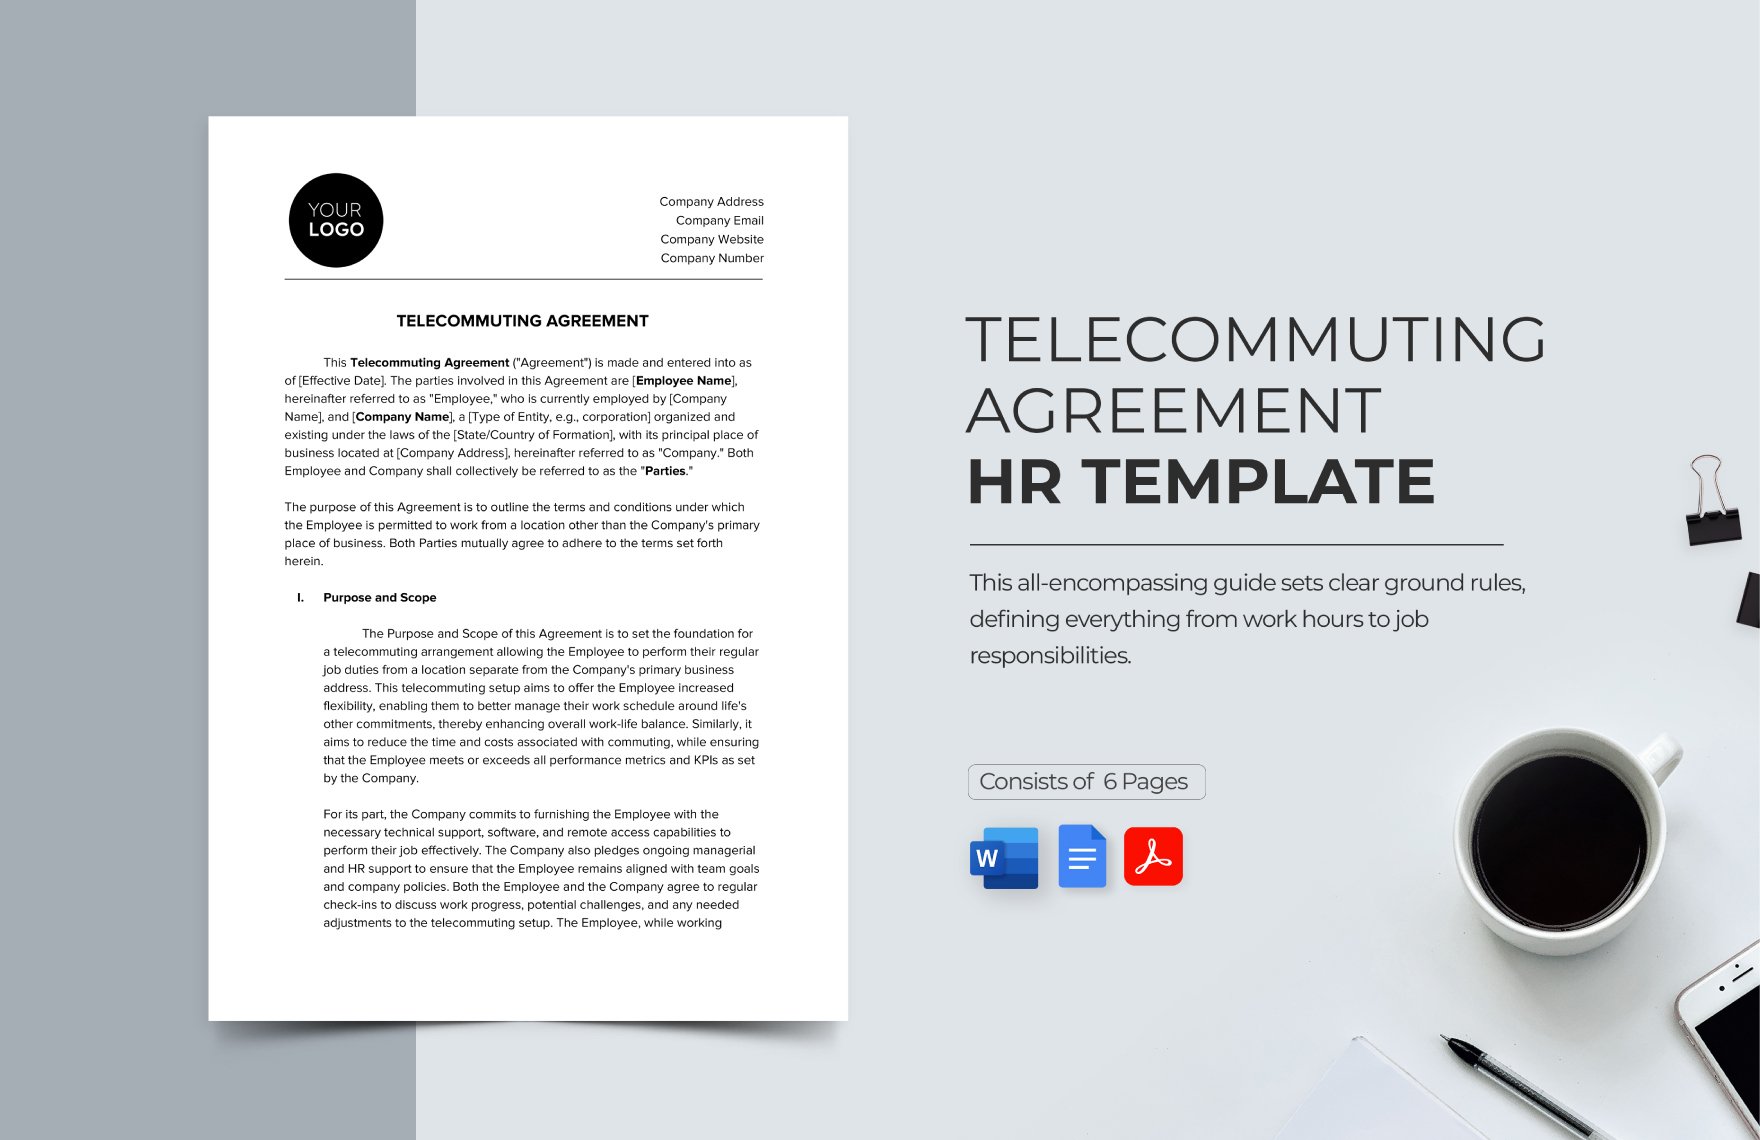 Telecommuting Agreement HR Template in Word, Google Docs, PDF